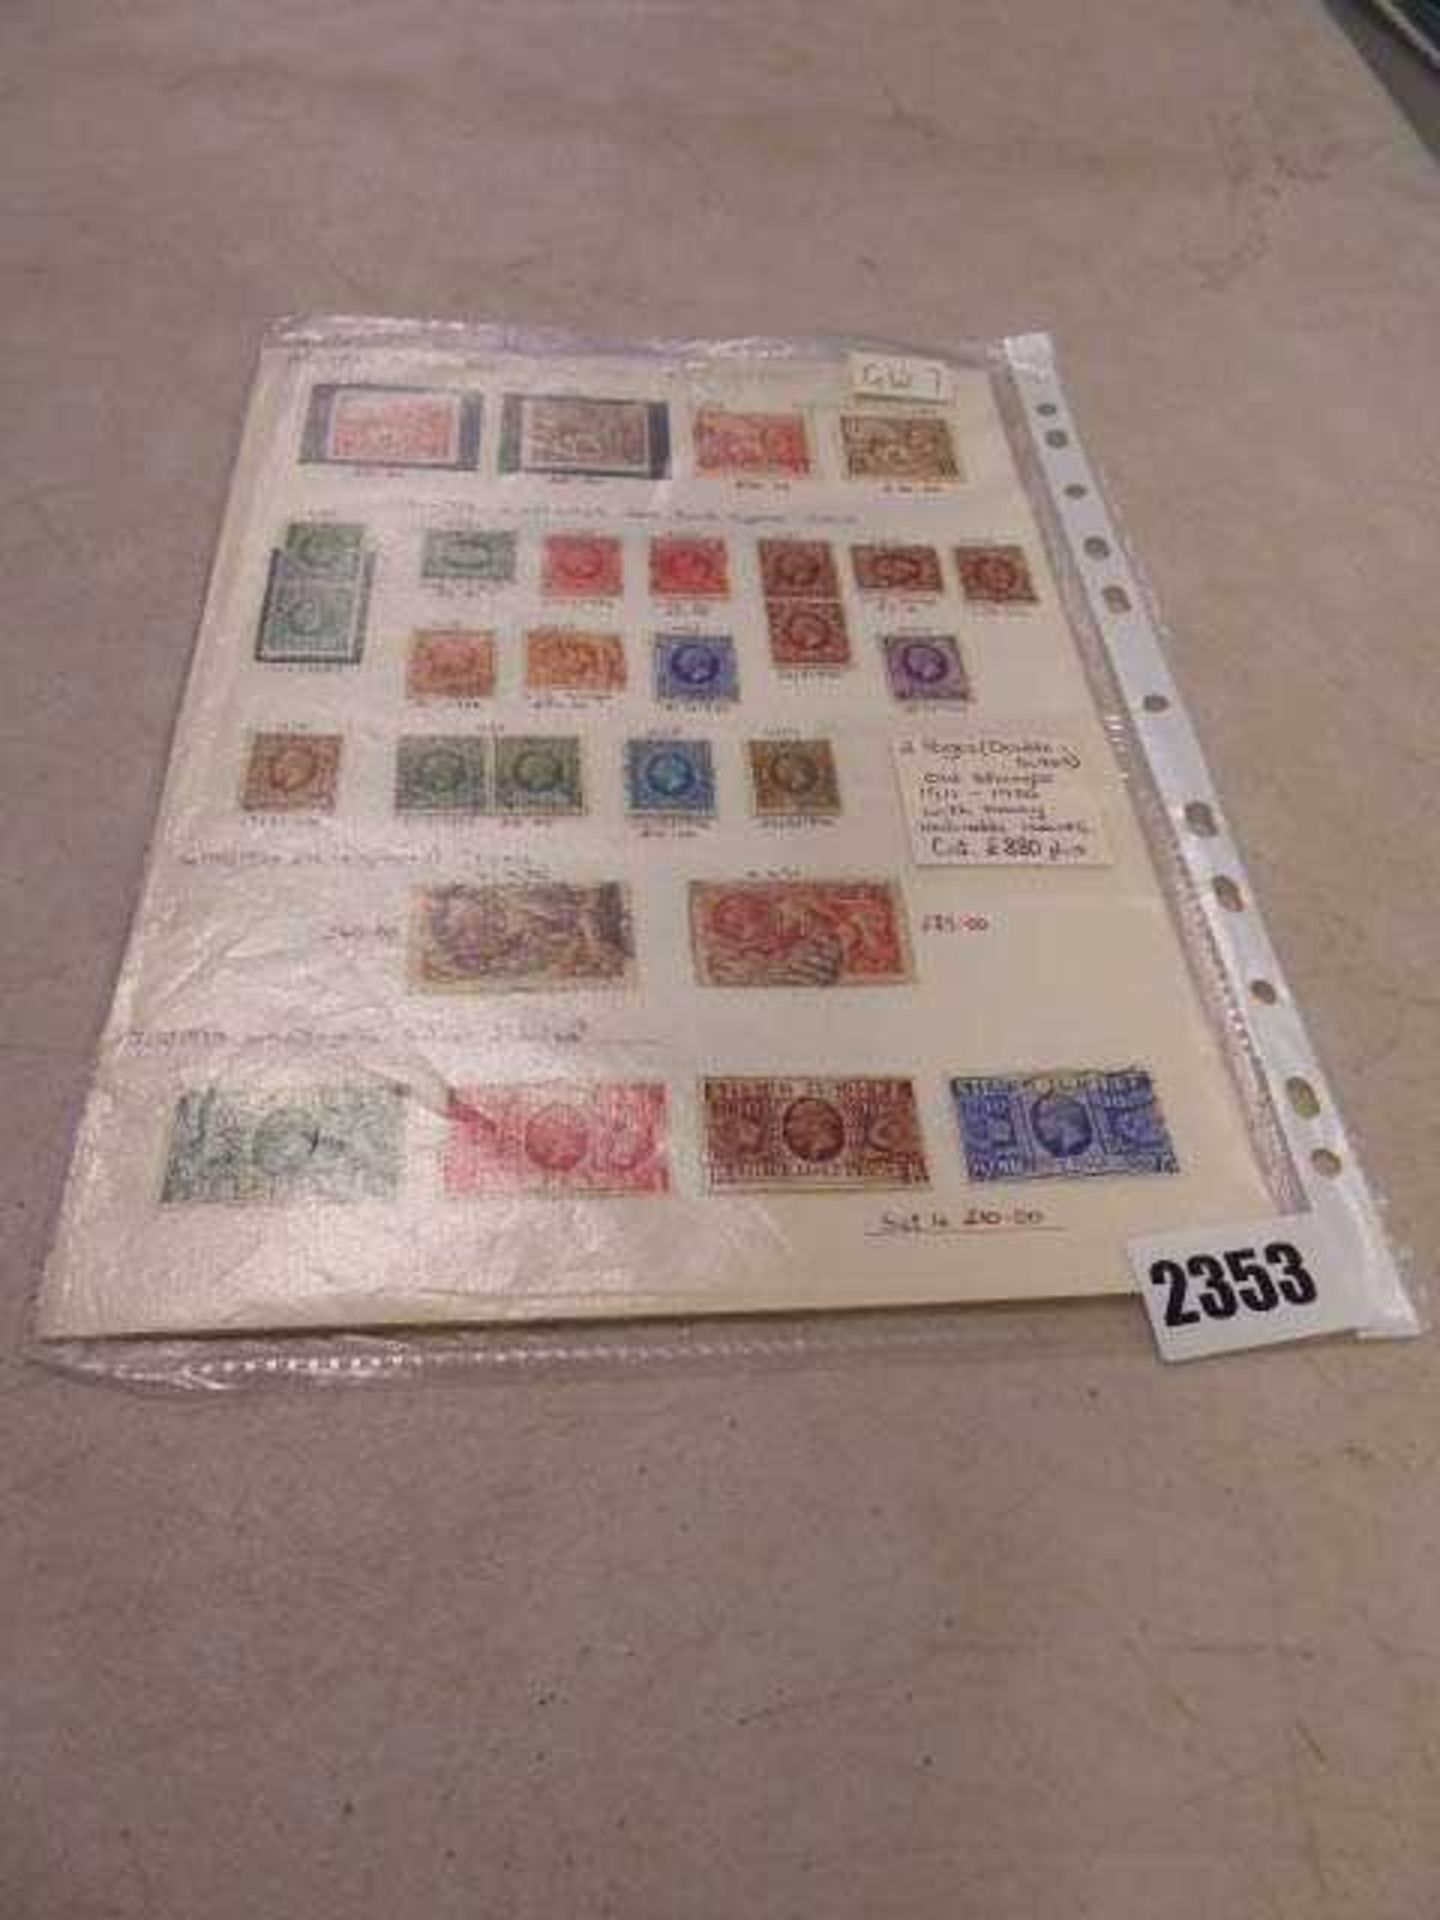 2 double sided pages of old stamps ranging from 1911-1936 with many valuable issues